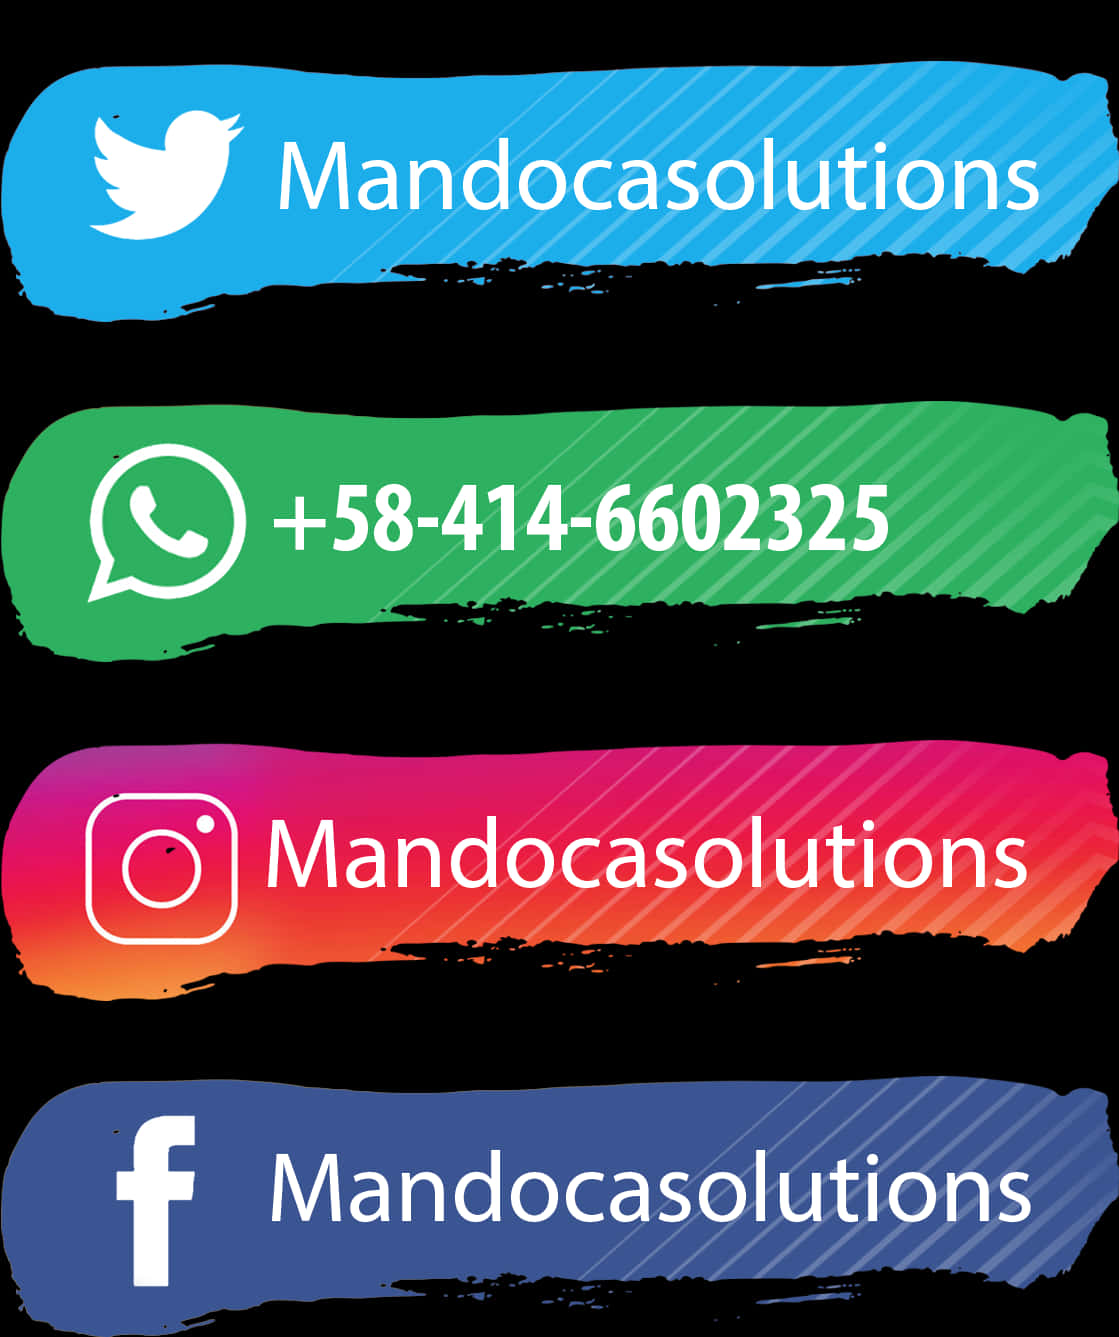 A Group Of Colorful Rectangular Banners With White Text